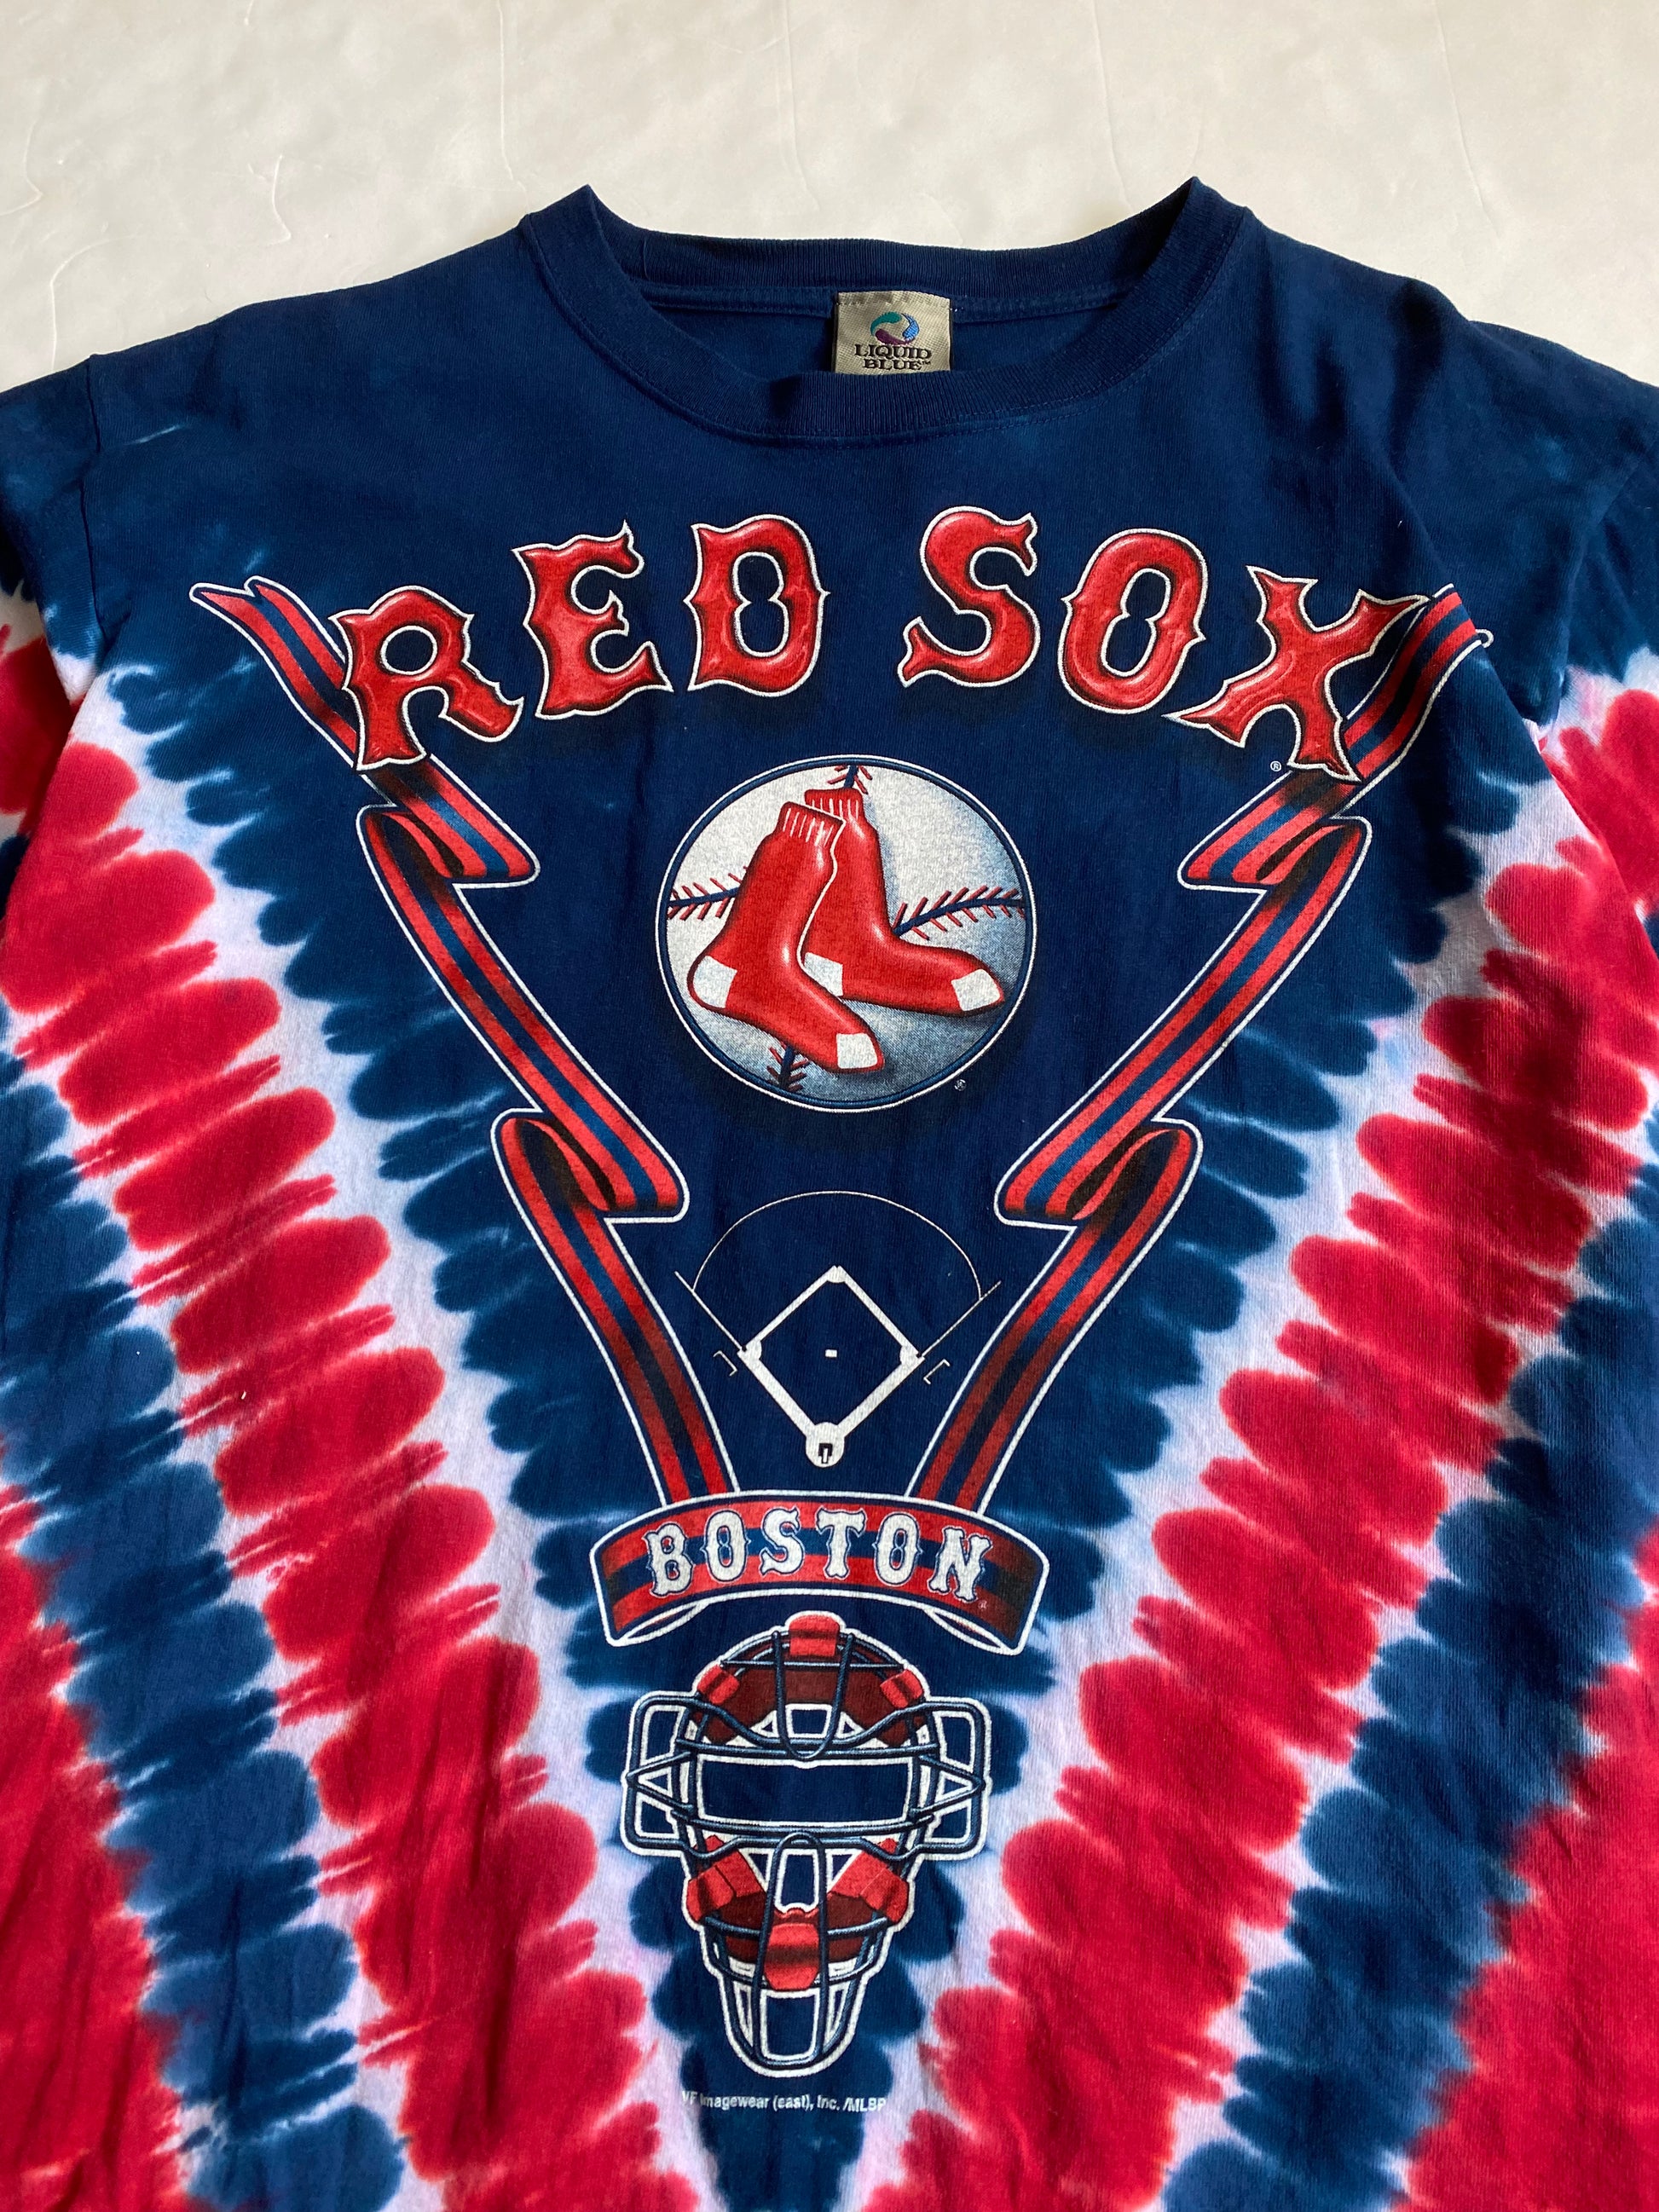 Vintage 1970s MLB Boston Red Sox T-shirt Made in USA